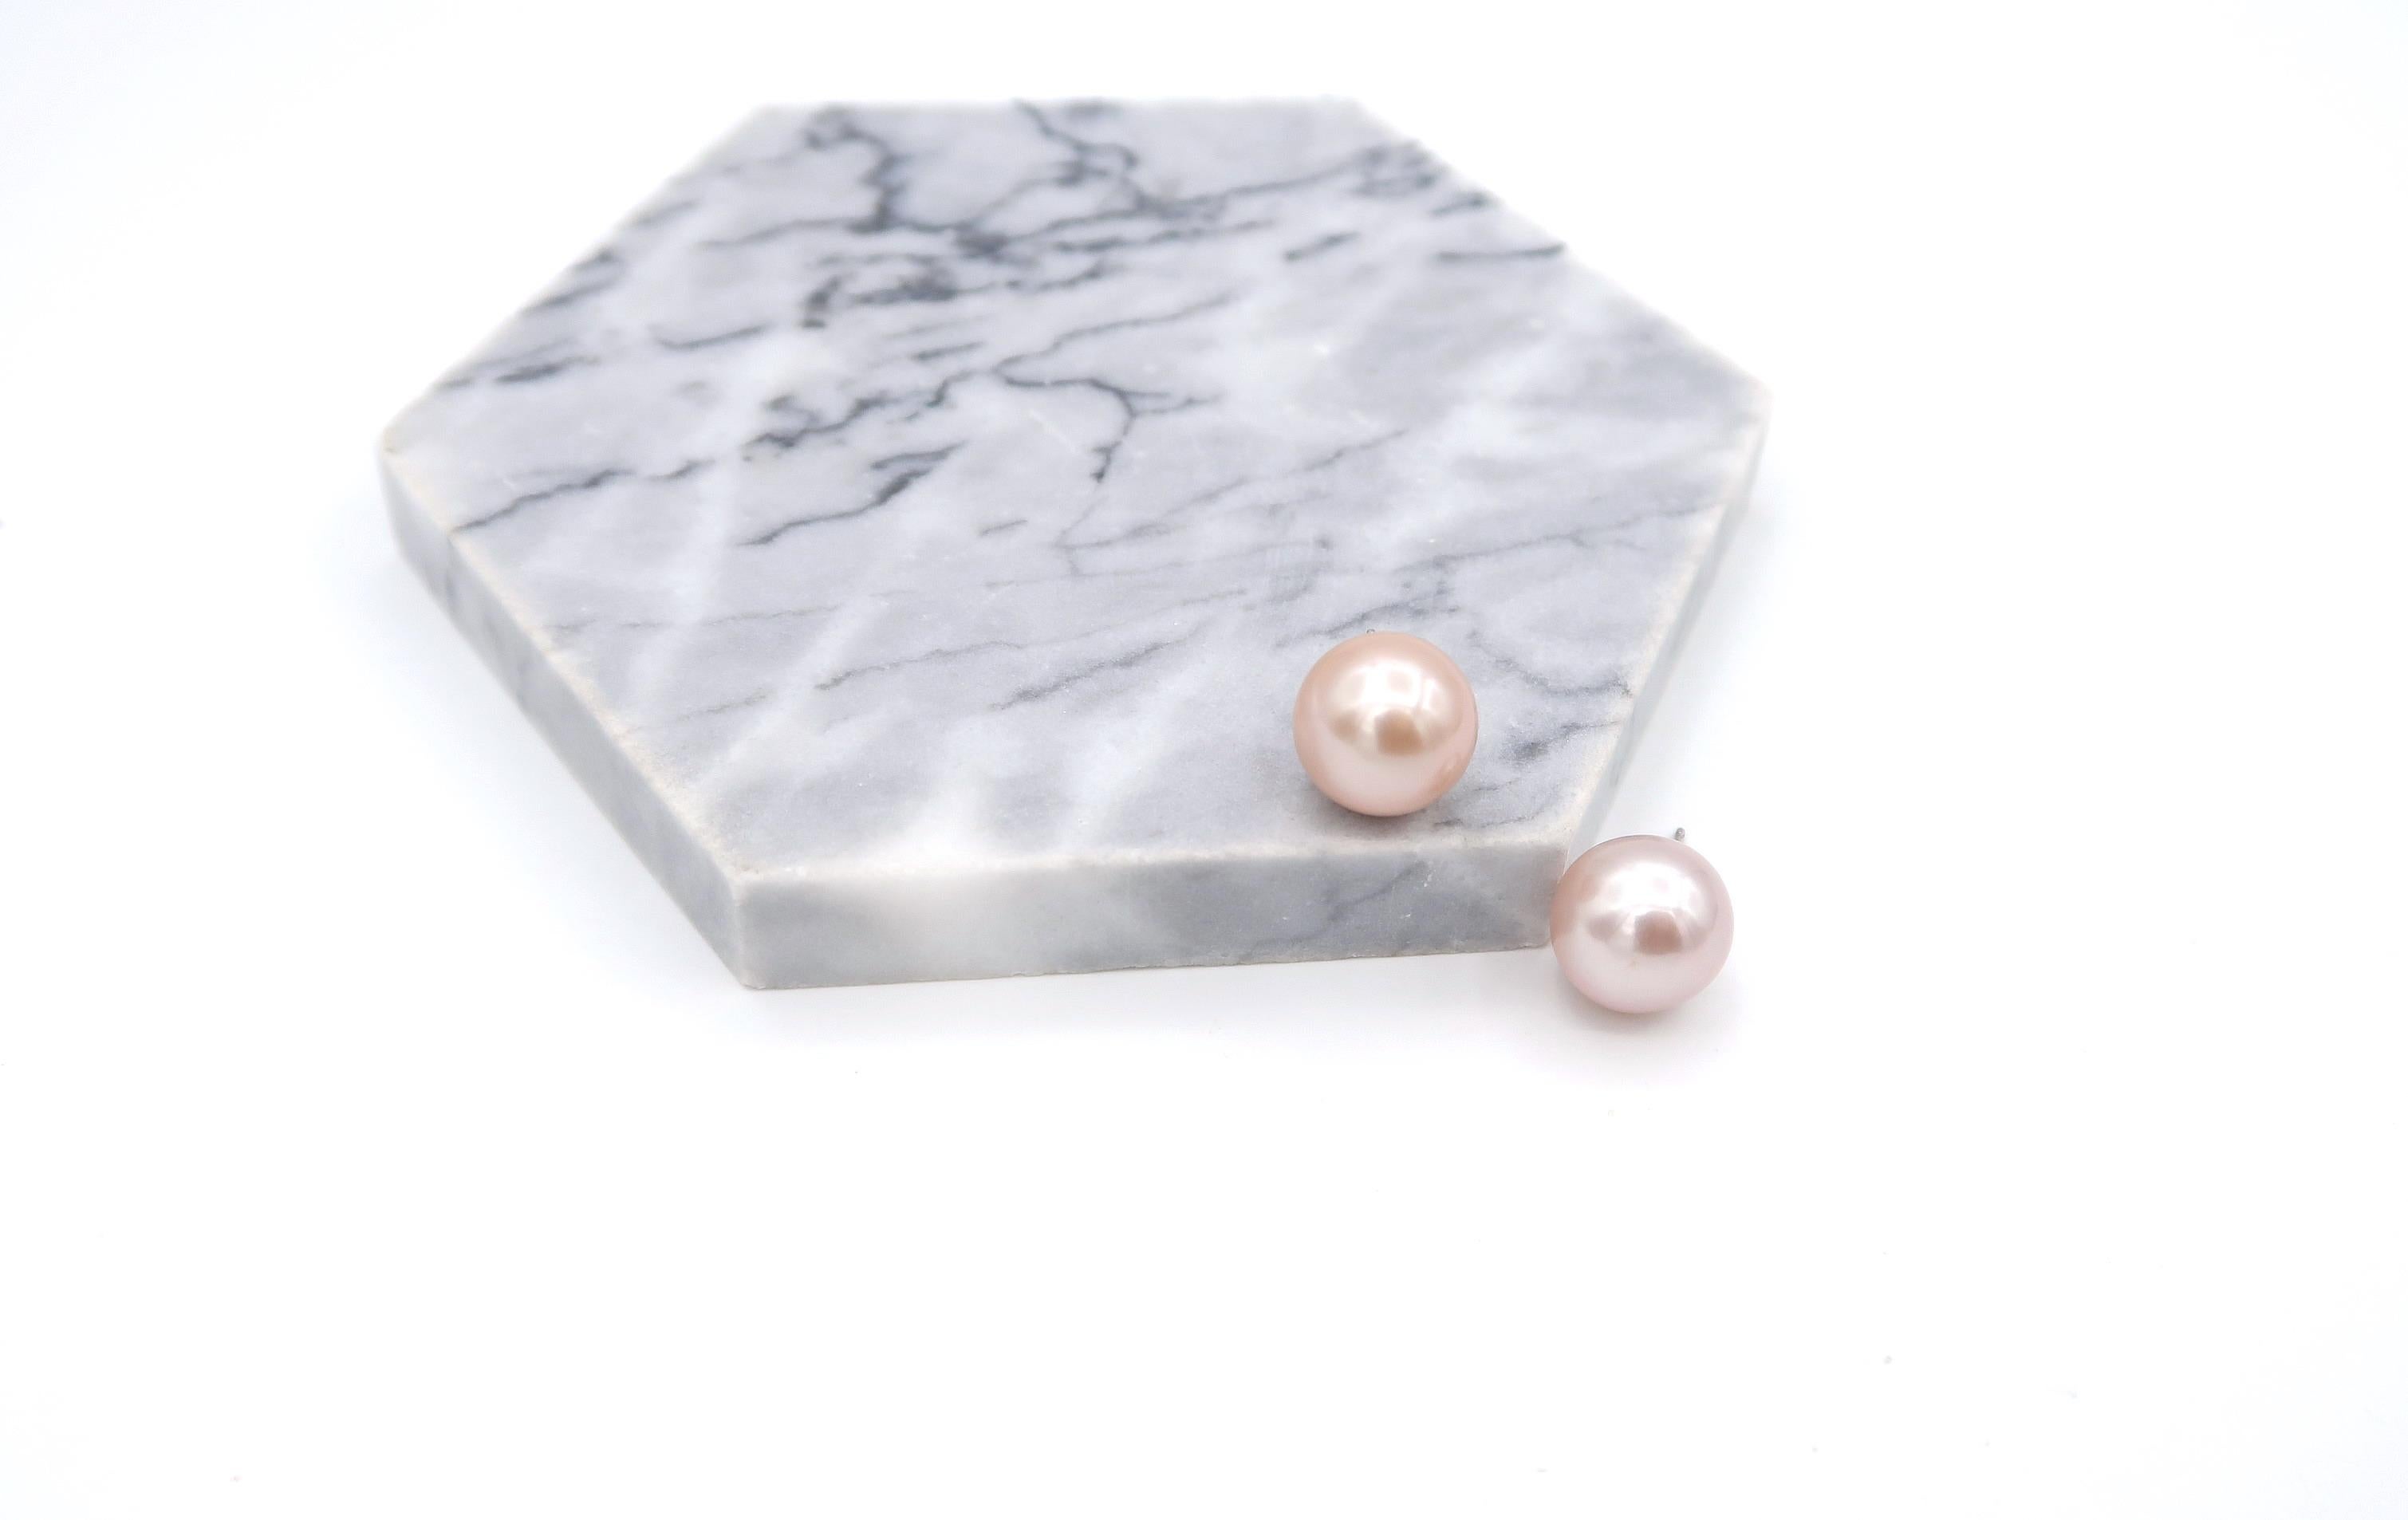 Simple Blush Pink Cultured Pearl Studs in 18 Karat Gold

Gold: 18K Gold
Pearl: Round, 11.08mm and 11.11mm